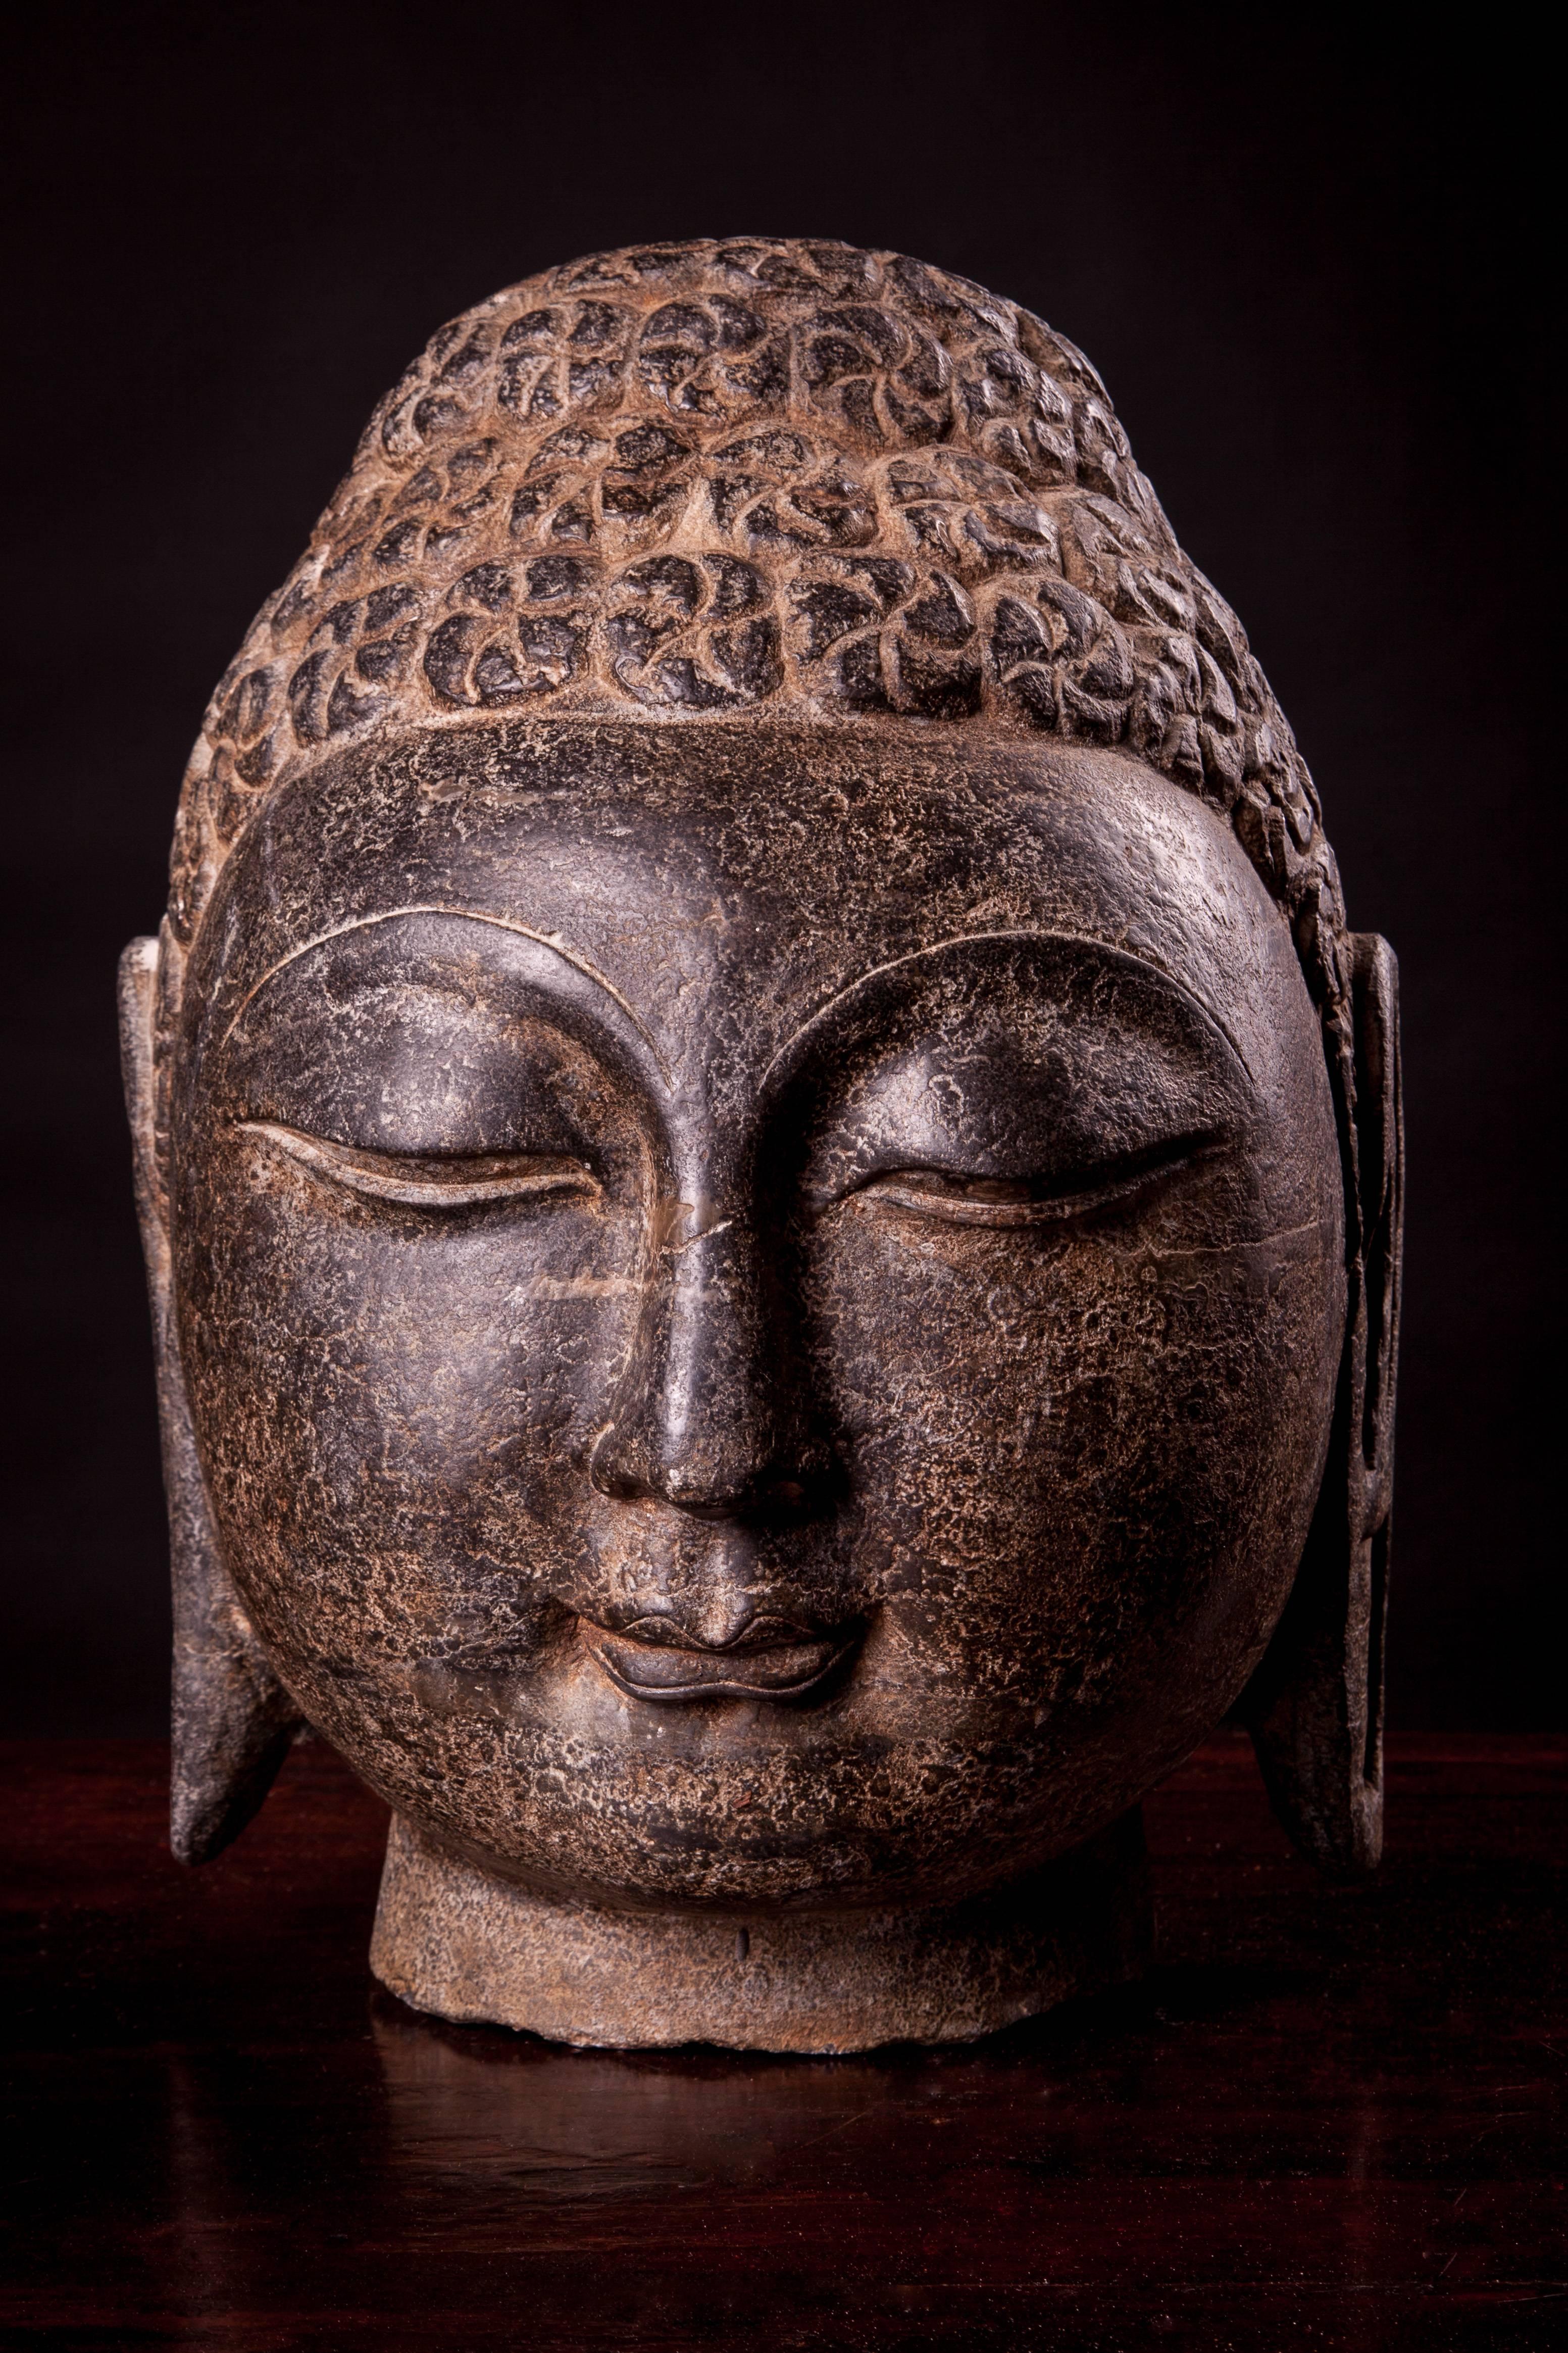 Mid-late Qing dynasty, circa 1900, stones carved Shakyamuni Buddha heads.

Known as the Gautama Shakyamuni Buddha, the face is supposed to express the moment of awakening/enlightenment, so Gautama Buddha represents the first enlightened one, whose